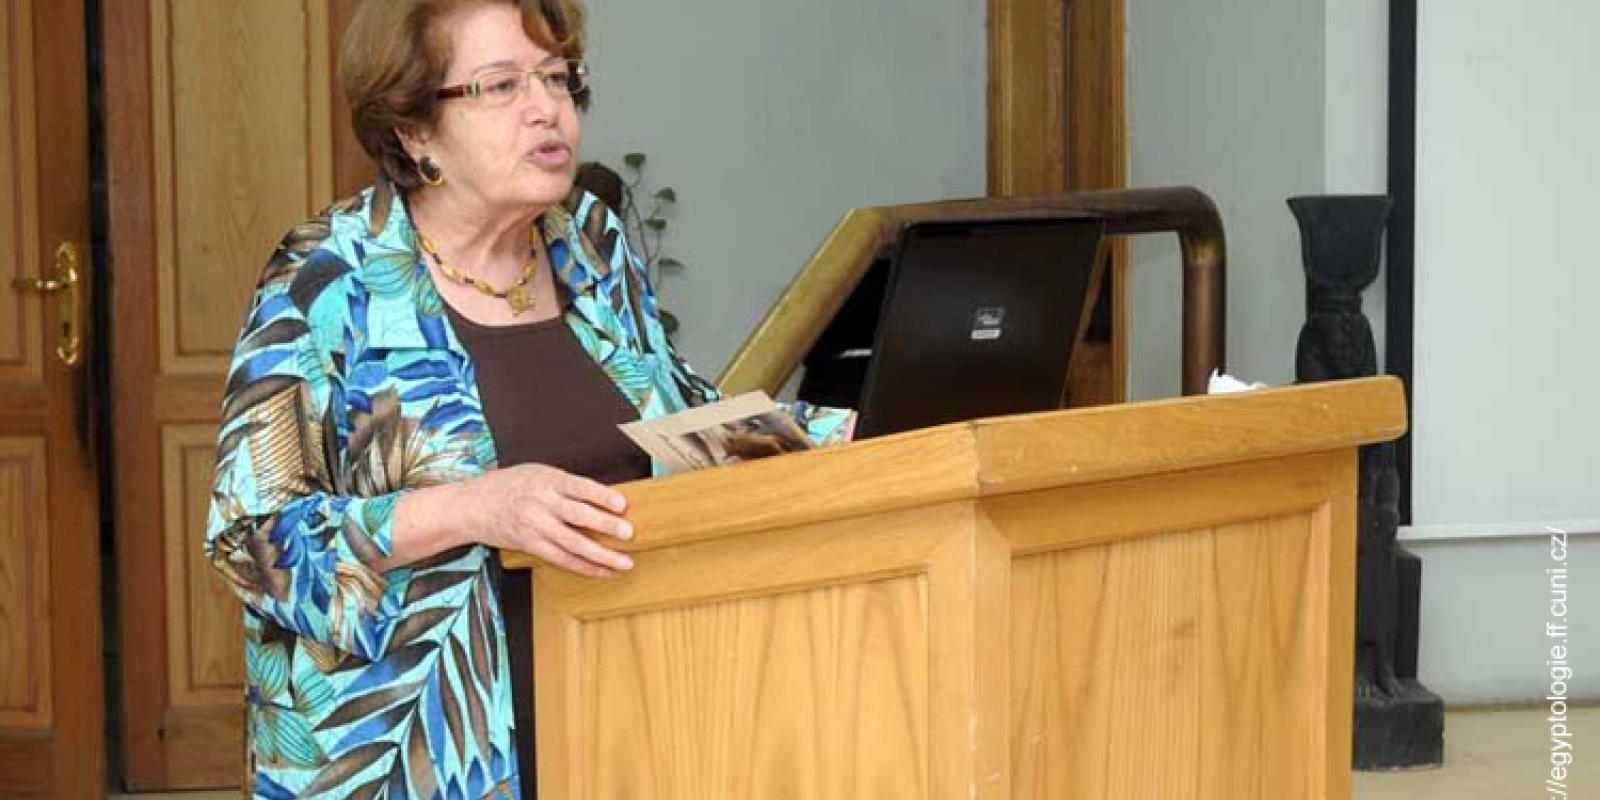 Egyptology Professor Fayza Haikal was recognized for her lifetime contributions to the Egyptology field